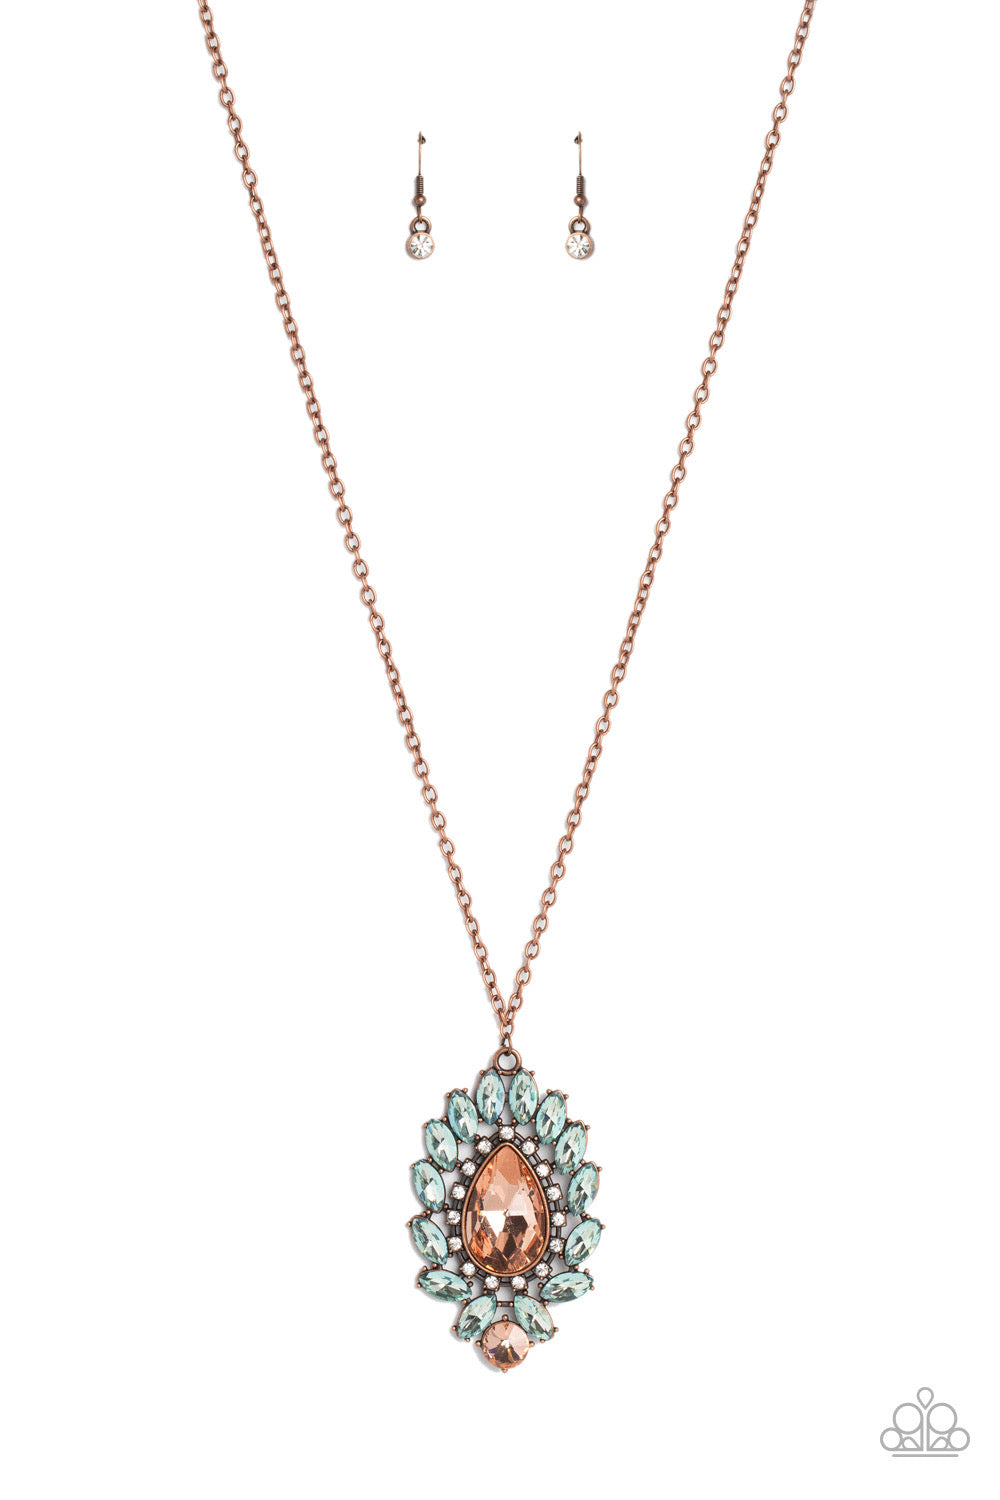 Paparazzi Over the TEARDROP - Copper Necklace